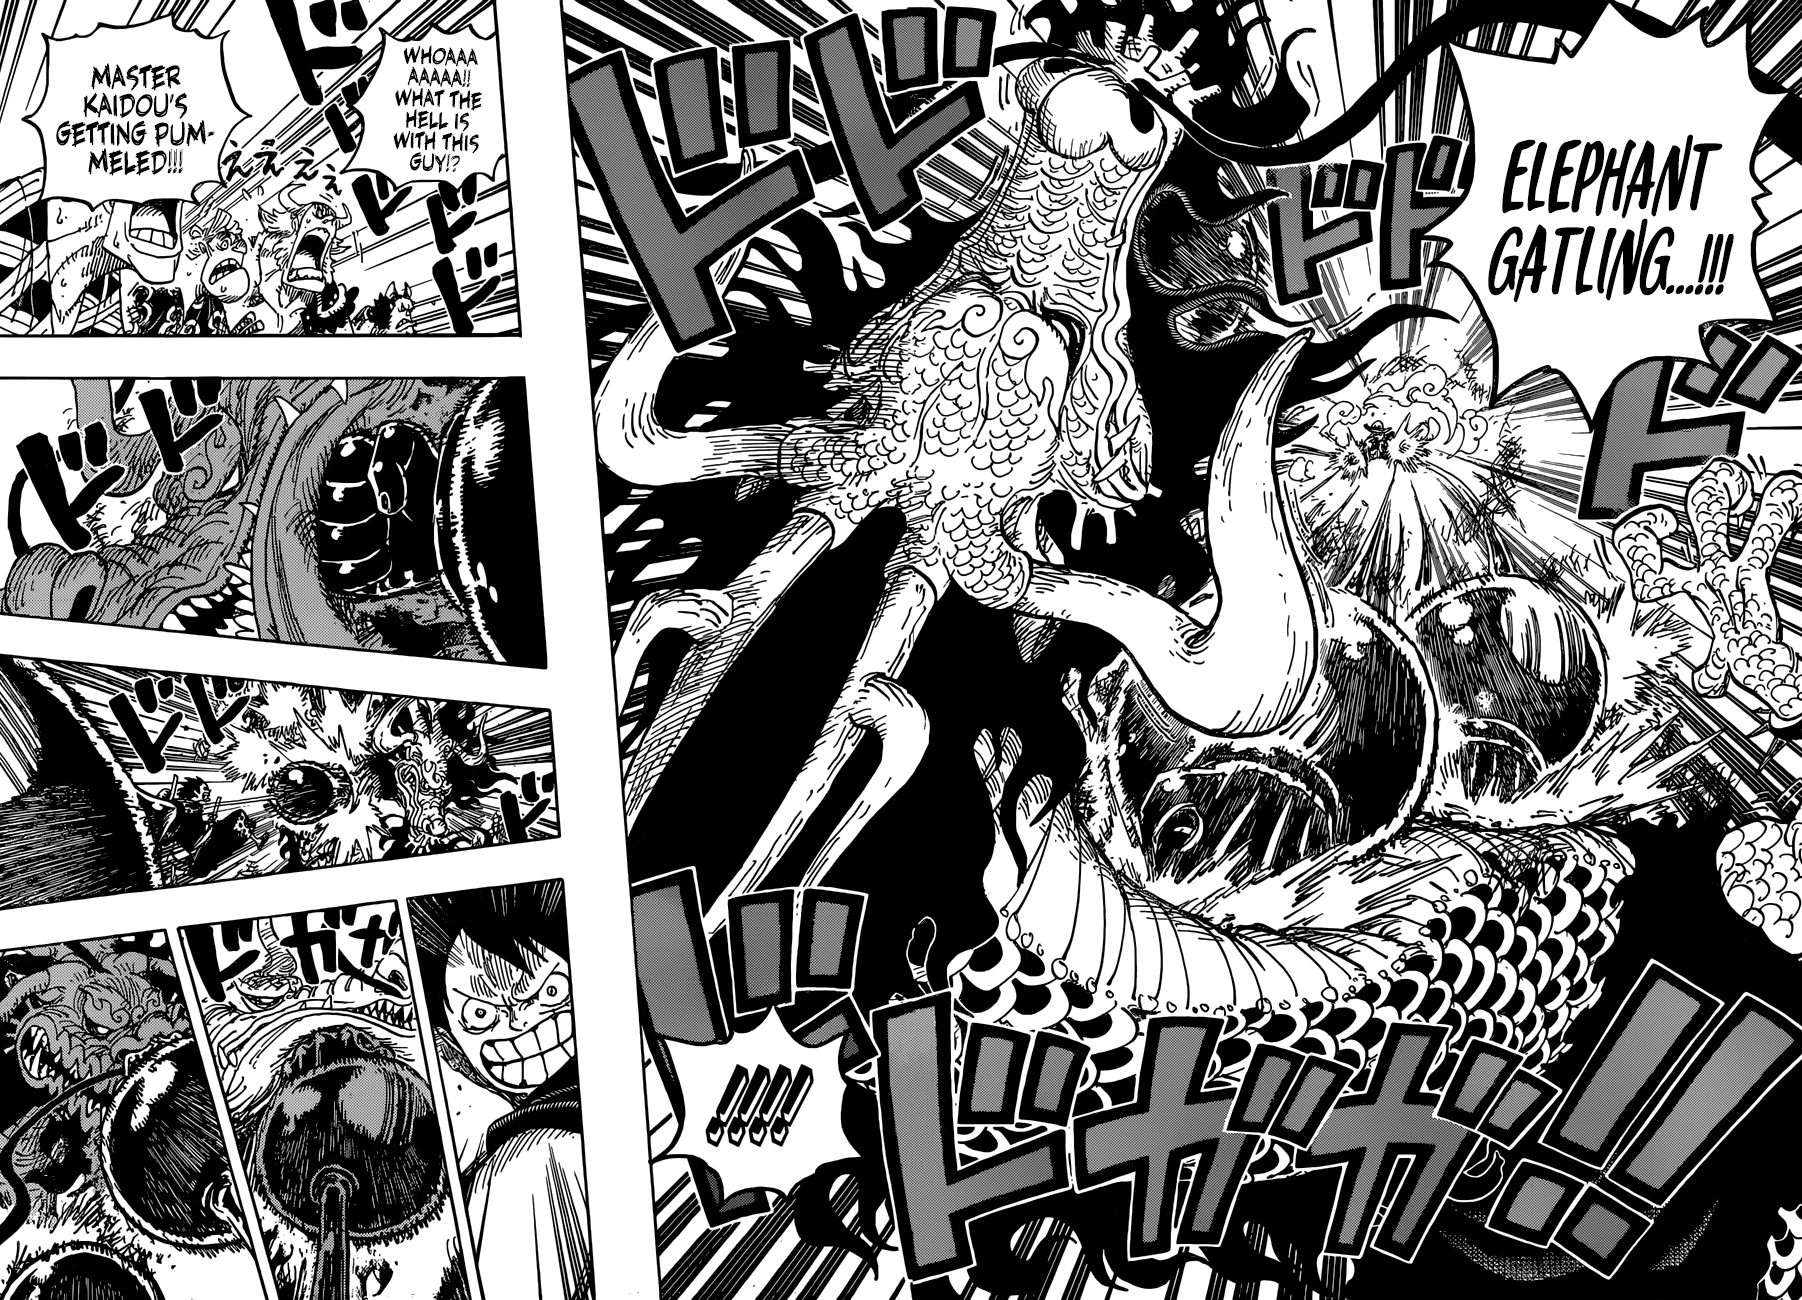 One Piece, Chapter 923 - Emperor Kaidou VS. Luffy image 10